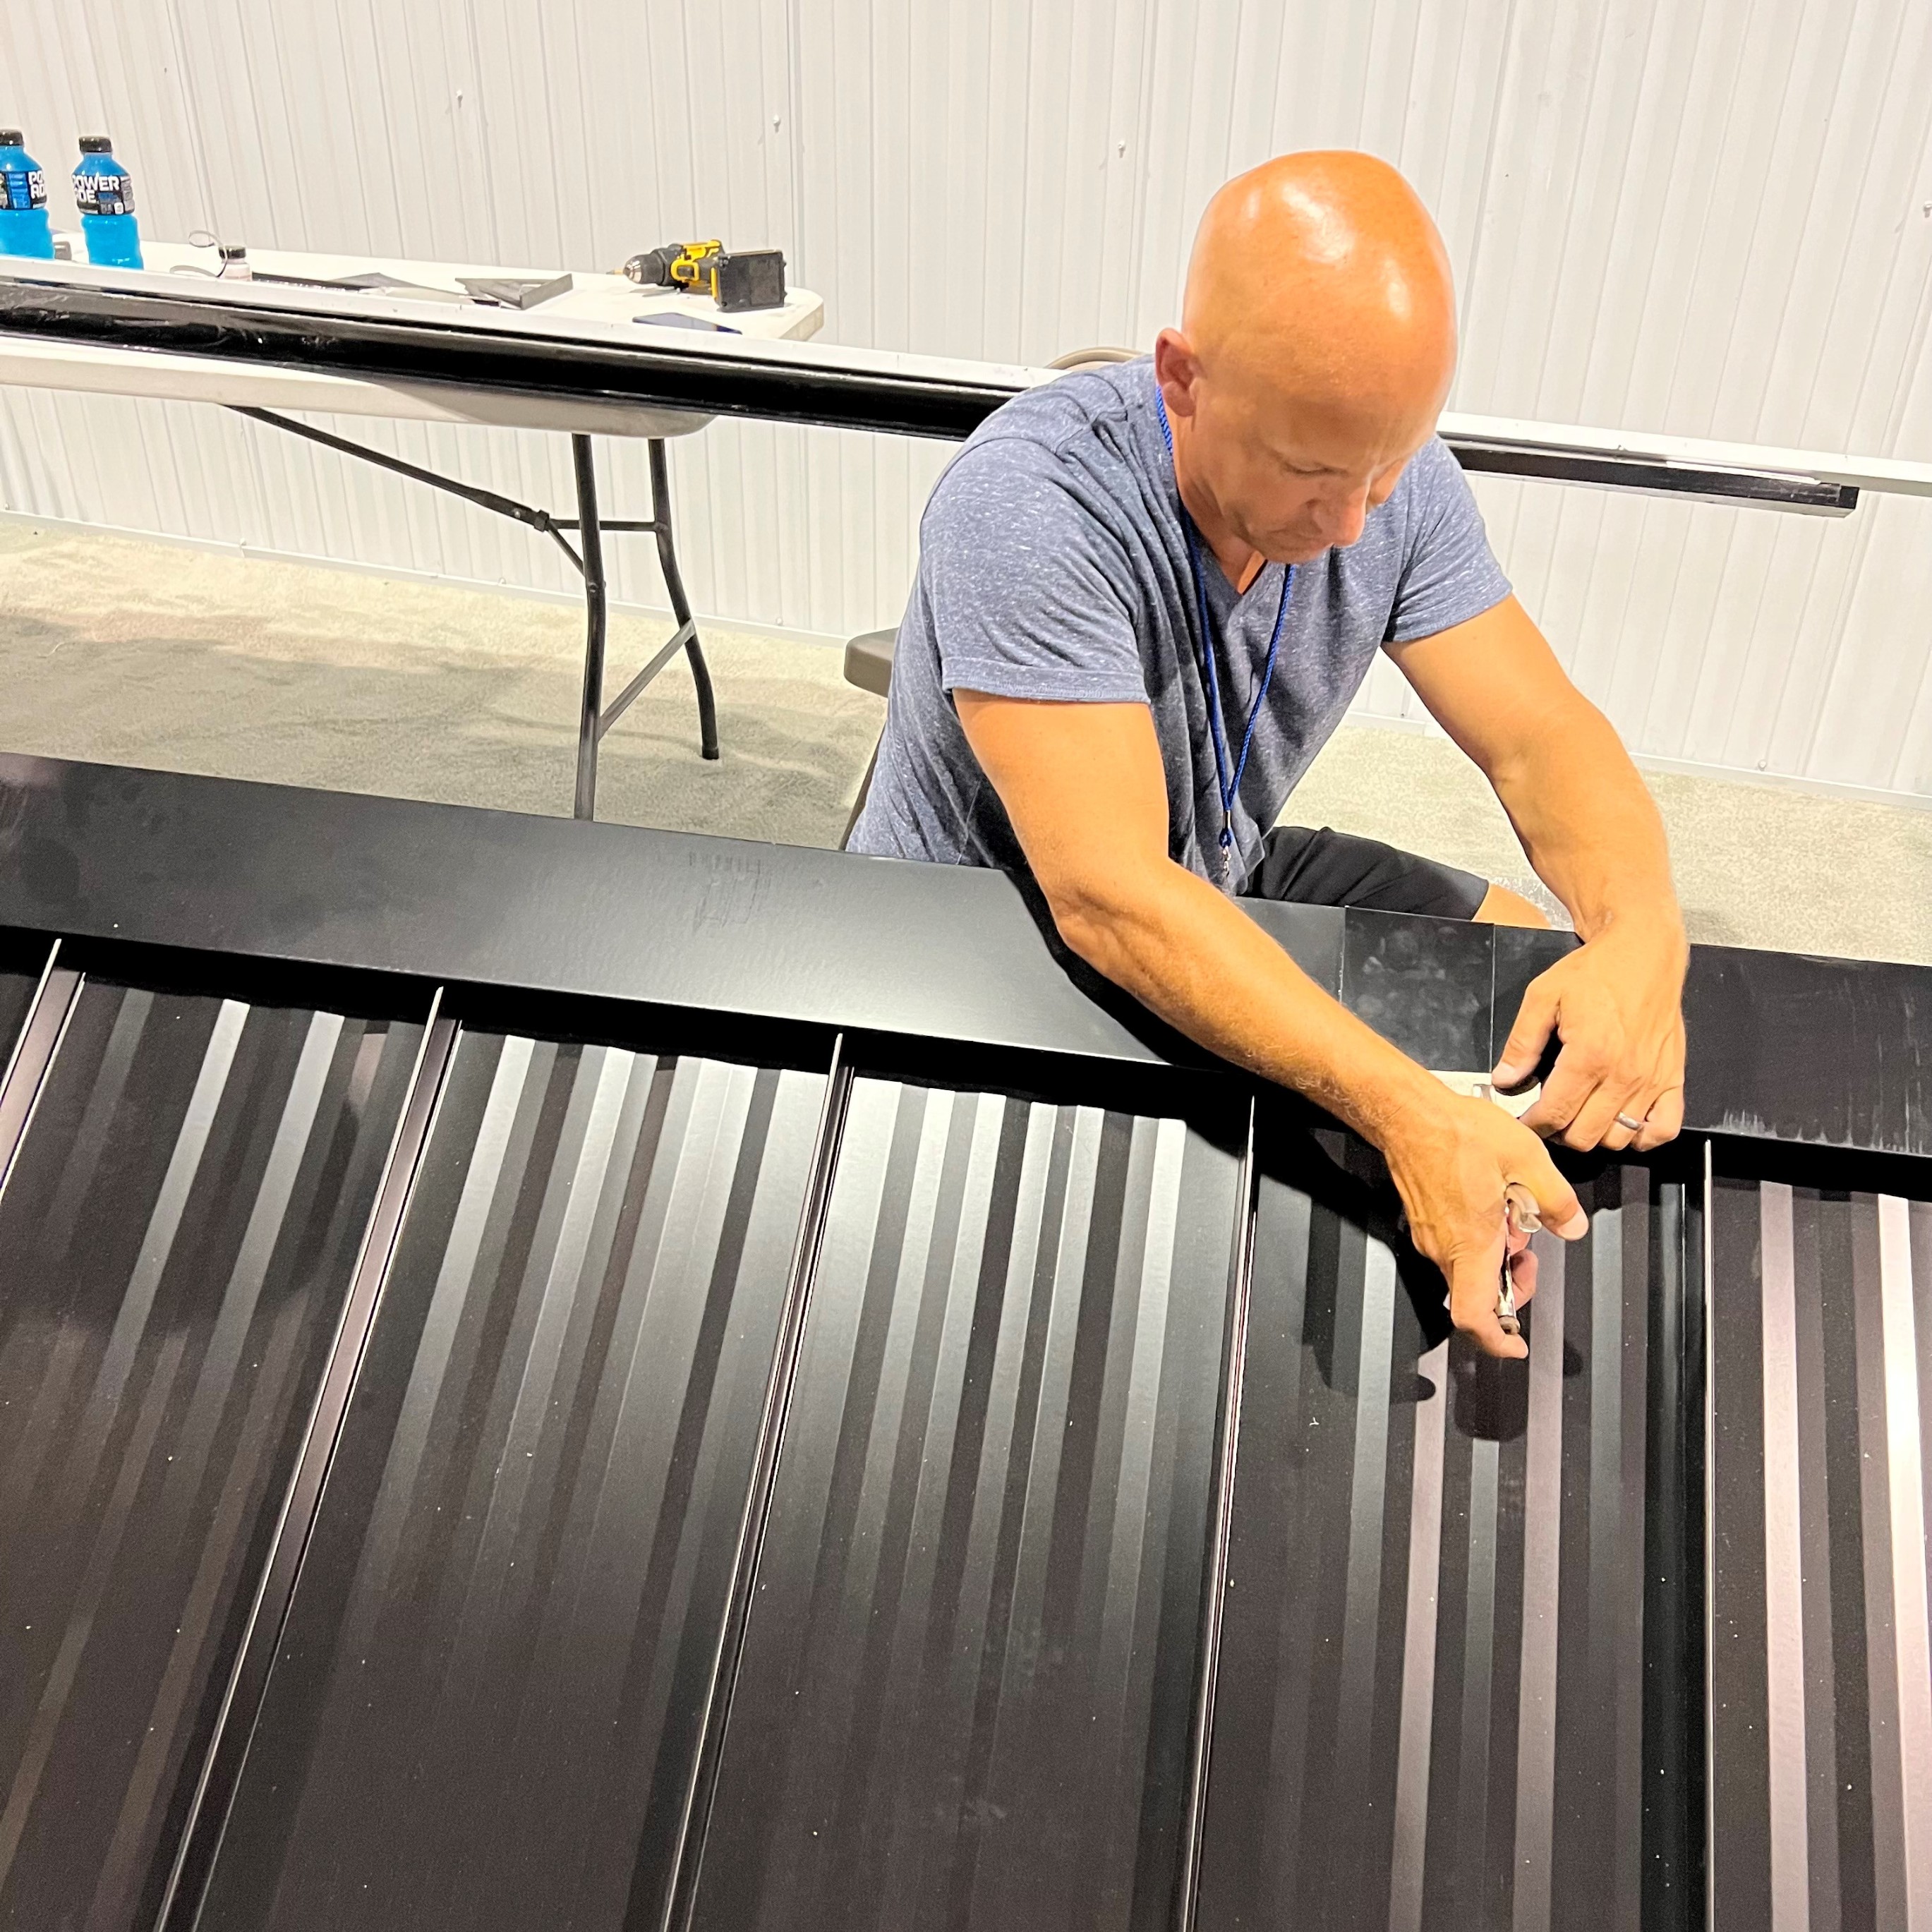 Metal Roofing Roll Flashing & Drip Edge for Metal Roofing-Metal Roofing  Components & Accessories - Union Corrugating Company